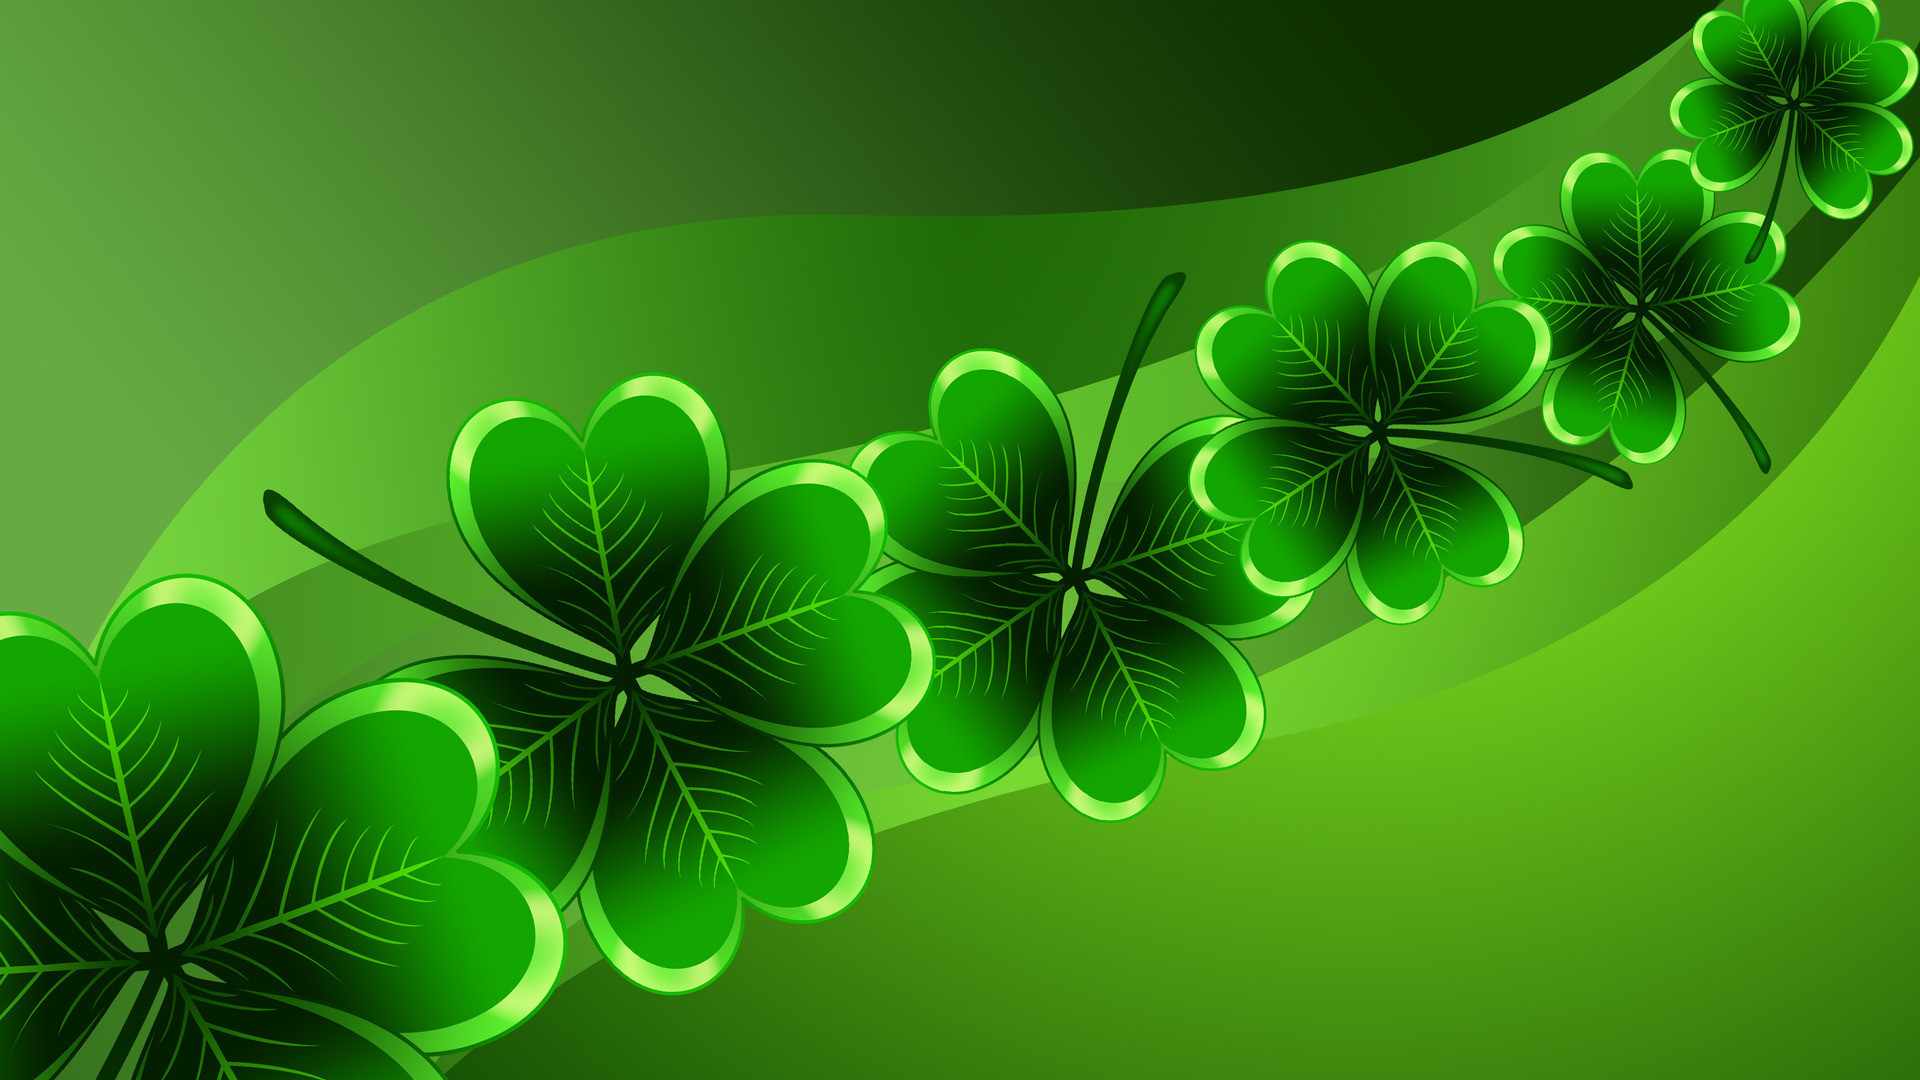 St patricks day wallpapers 4